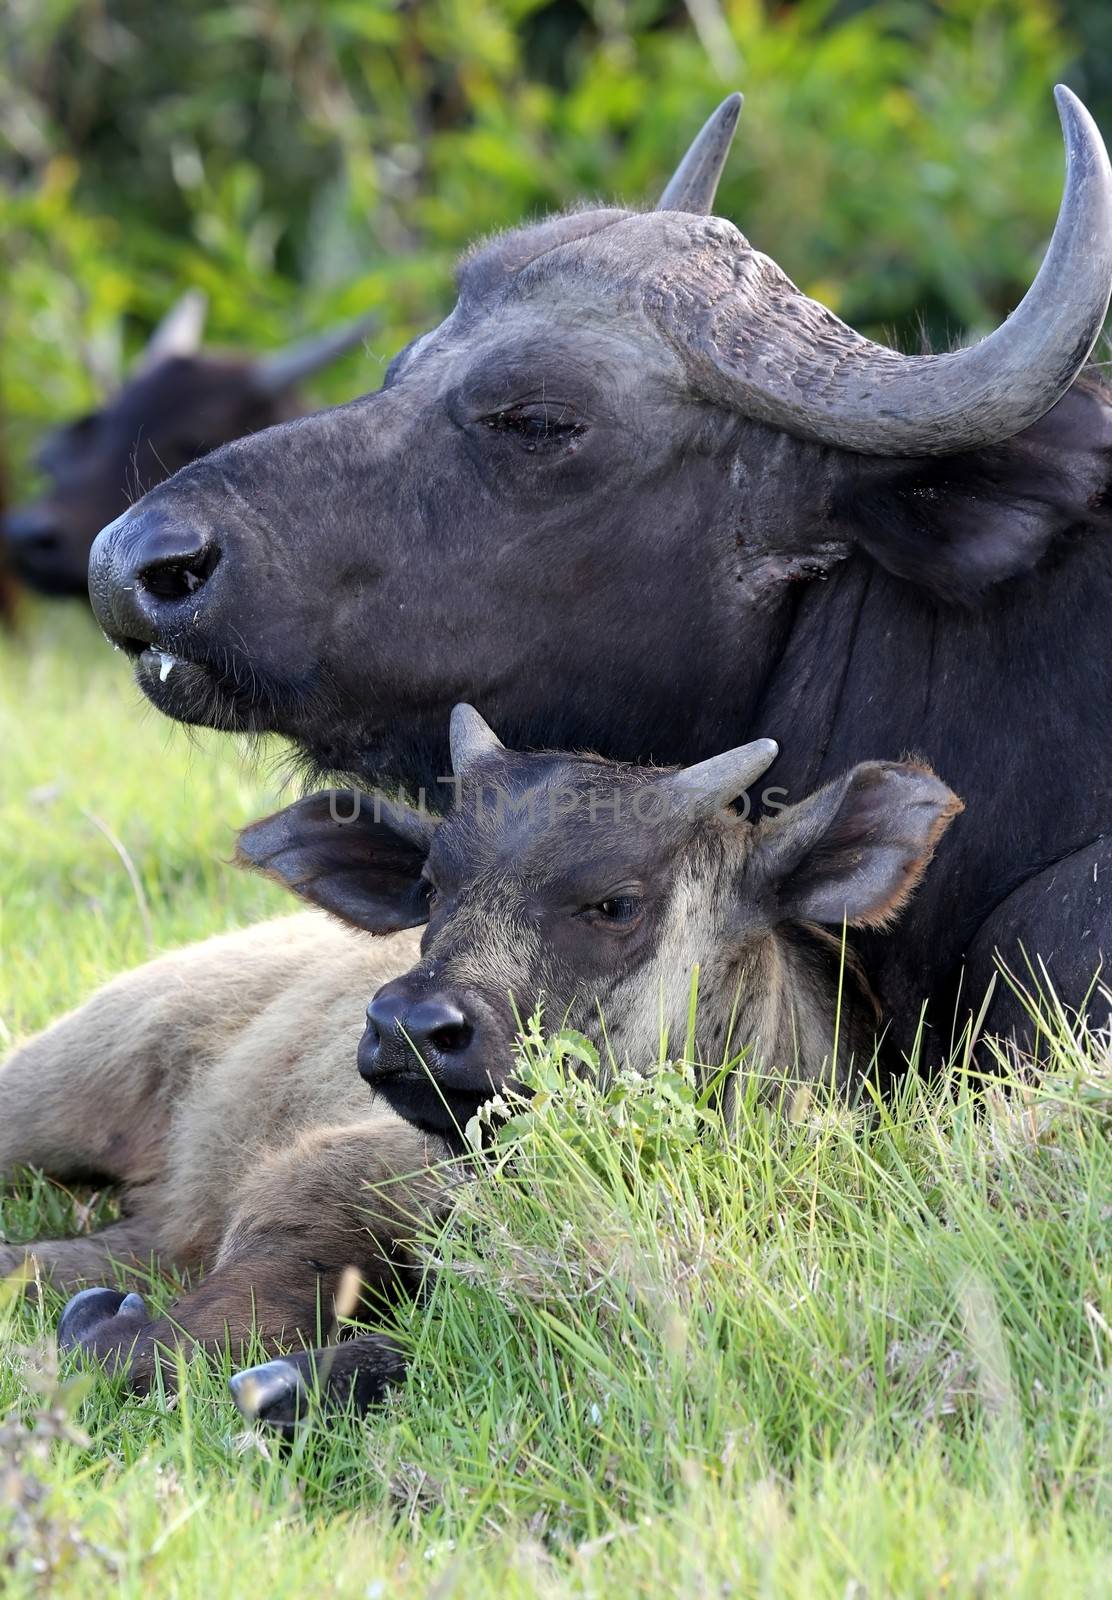 Buffalo cow protecting it's young calf at it's side